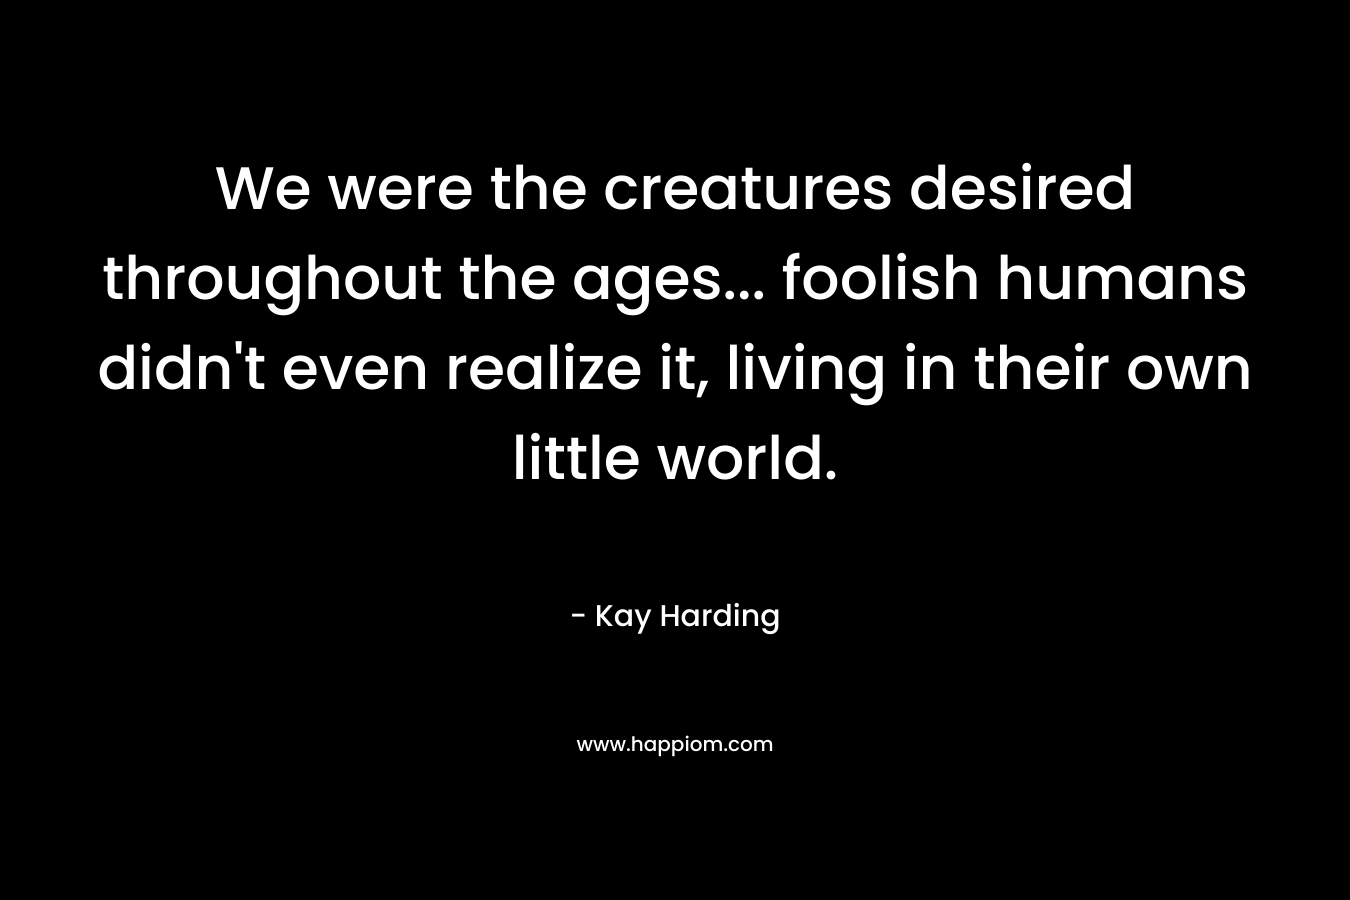 We were the creatures desired throughout the ages… foolish humans didn’t even realize it, living in their own little world. – Kay Harding